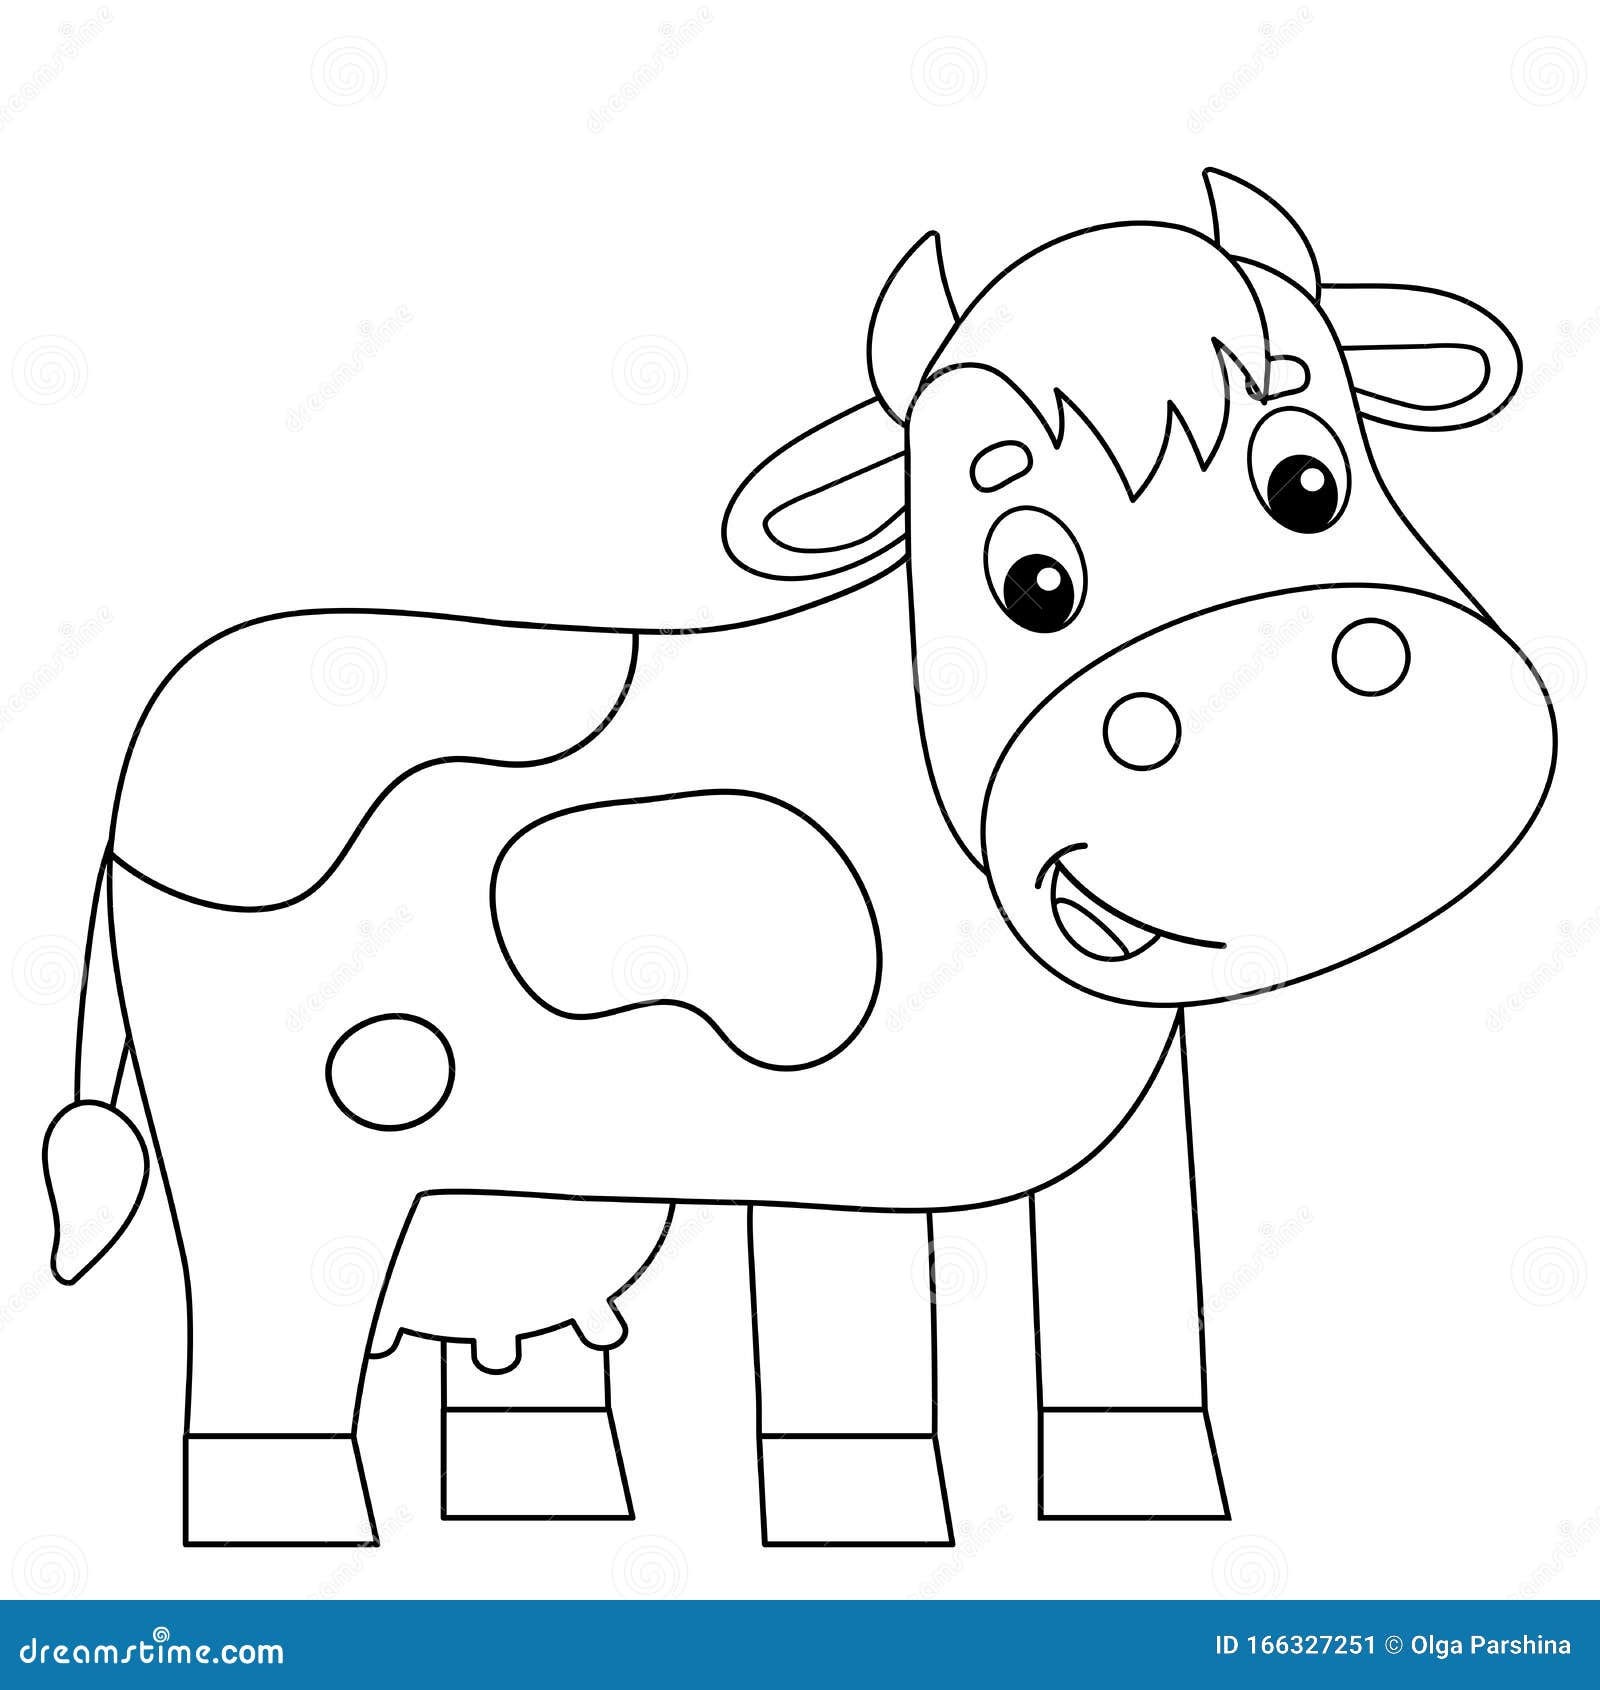 Download Coloring Page Outline Of Cartoon Cow Farm Animals Coloring Book For Kids Stock Vector Illustration Of Milk Kine 166327251